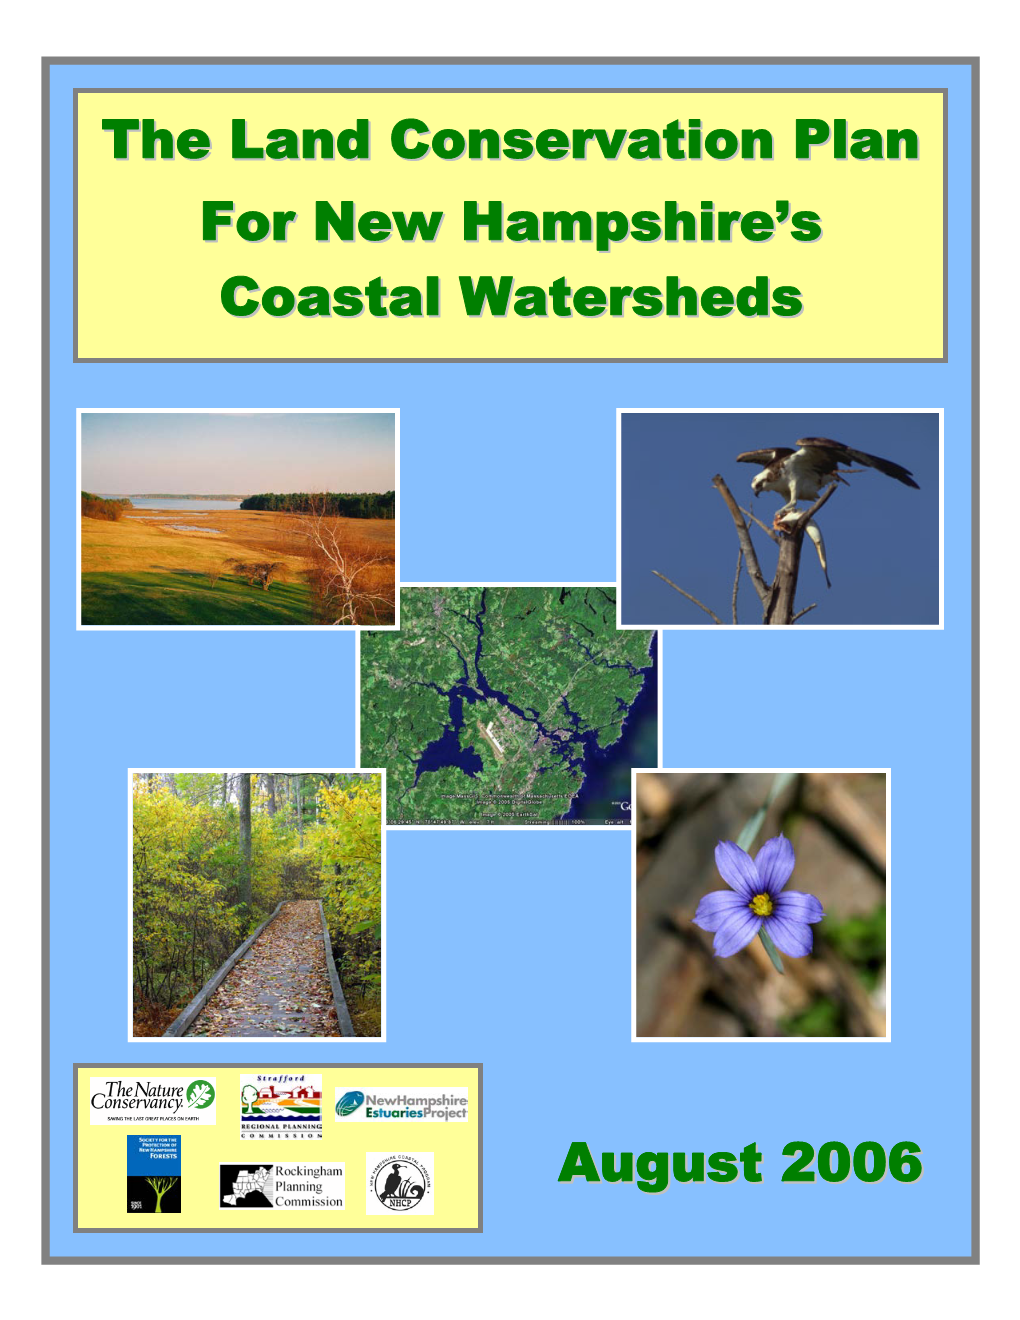 August 2006 the Land Conservation Pla Nn for New Hampshire's